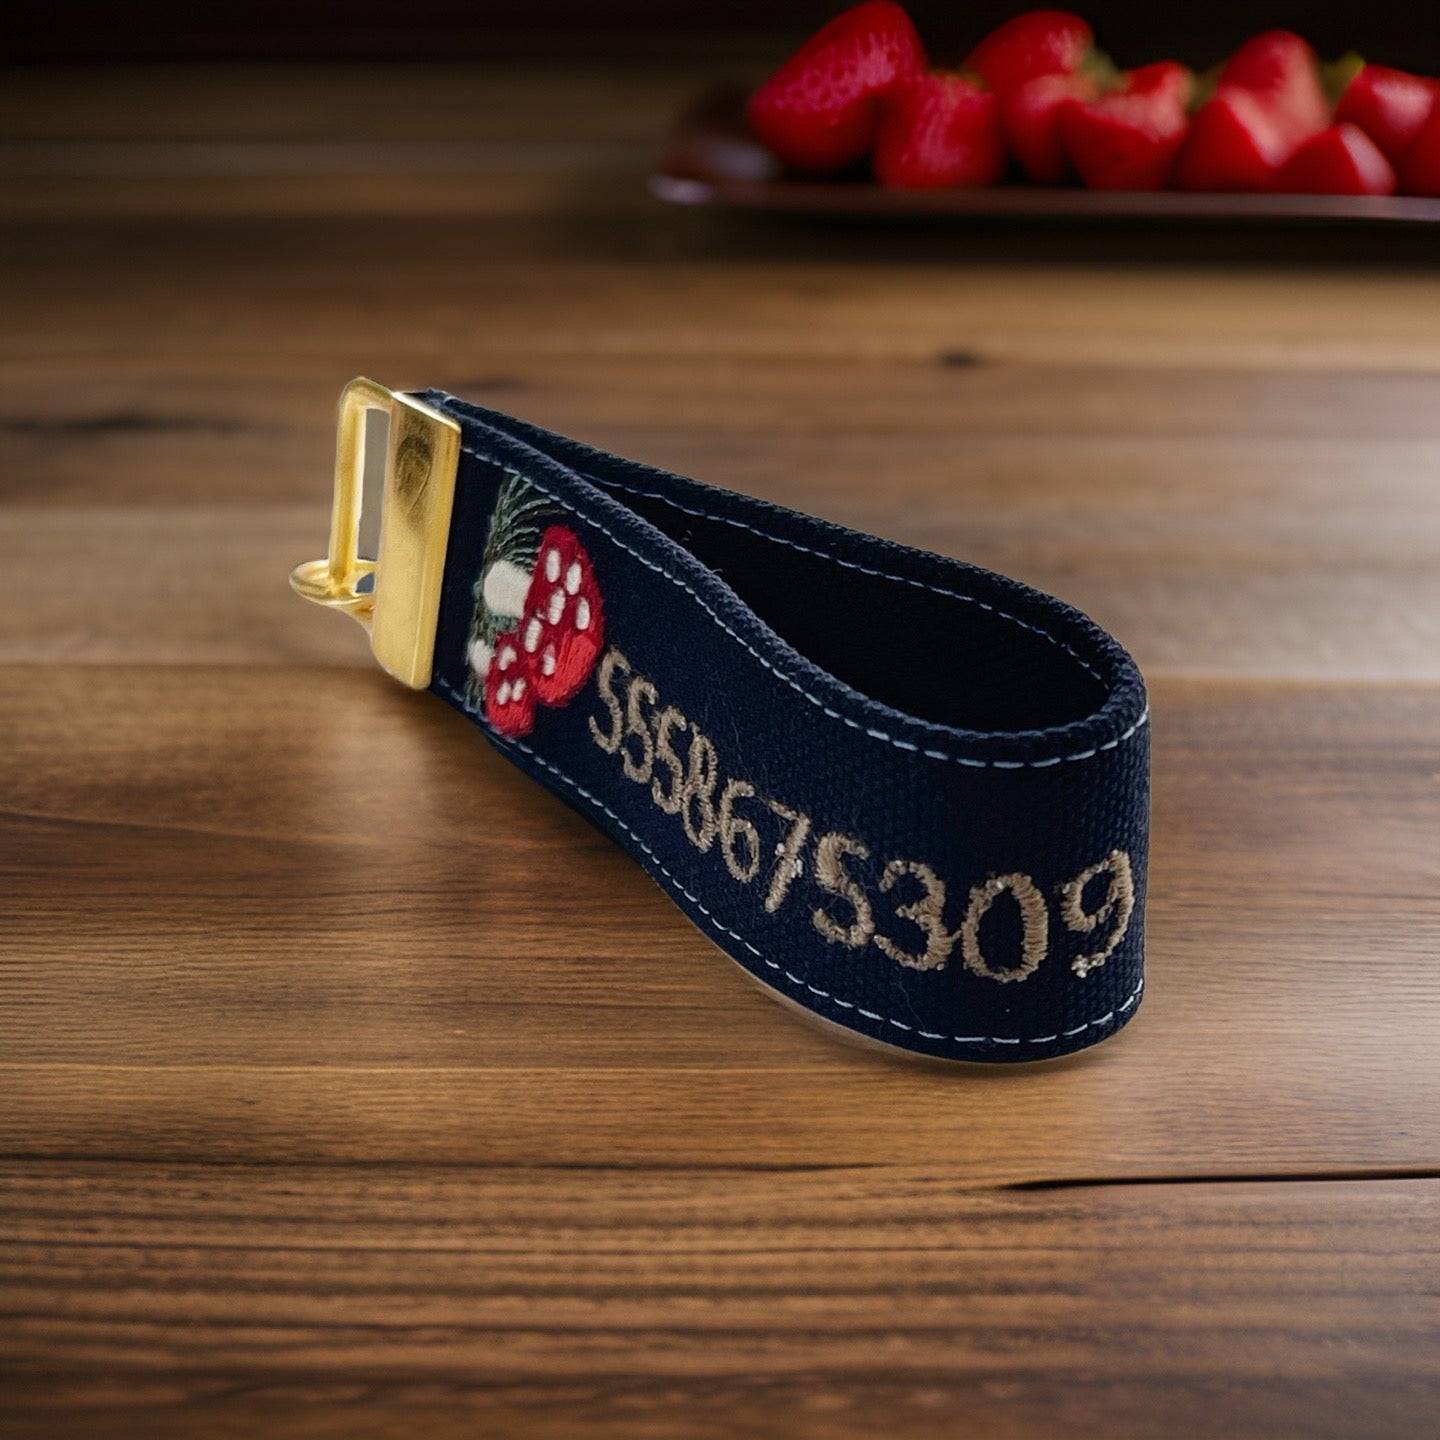 Handmade Embroidered Woodland Key Fob with Personalized Phone Number: The perfect accessory for key holders